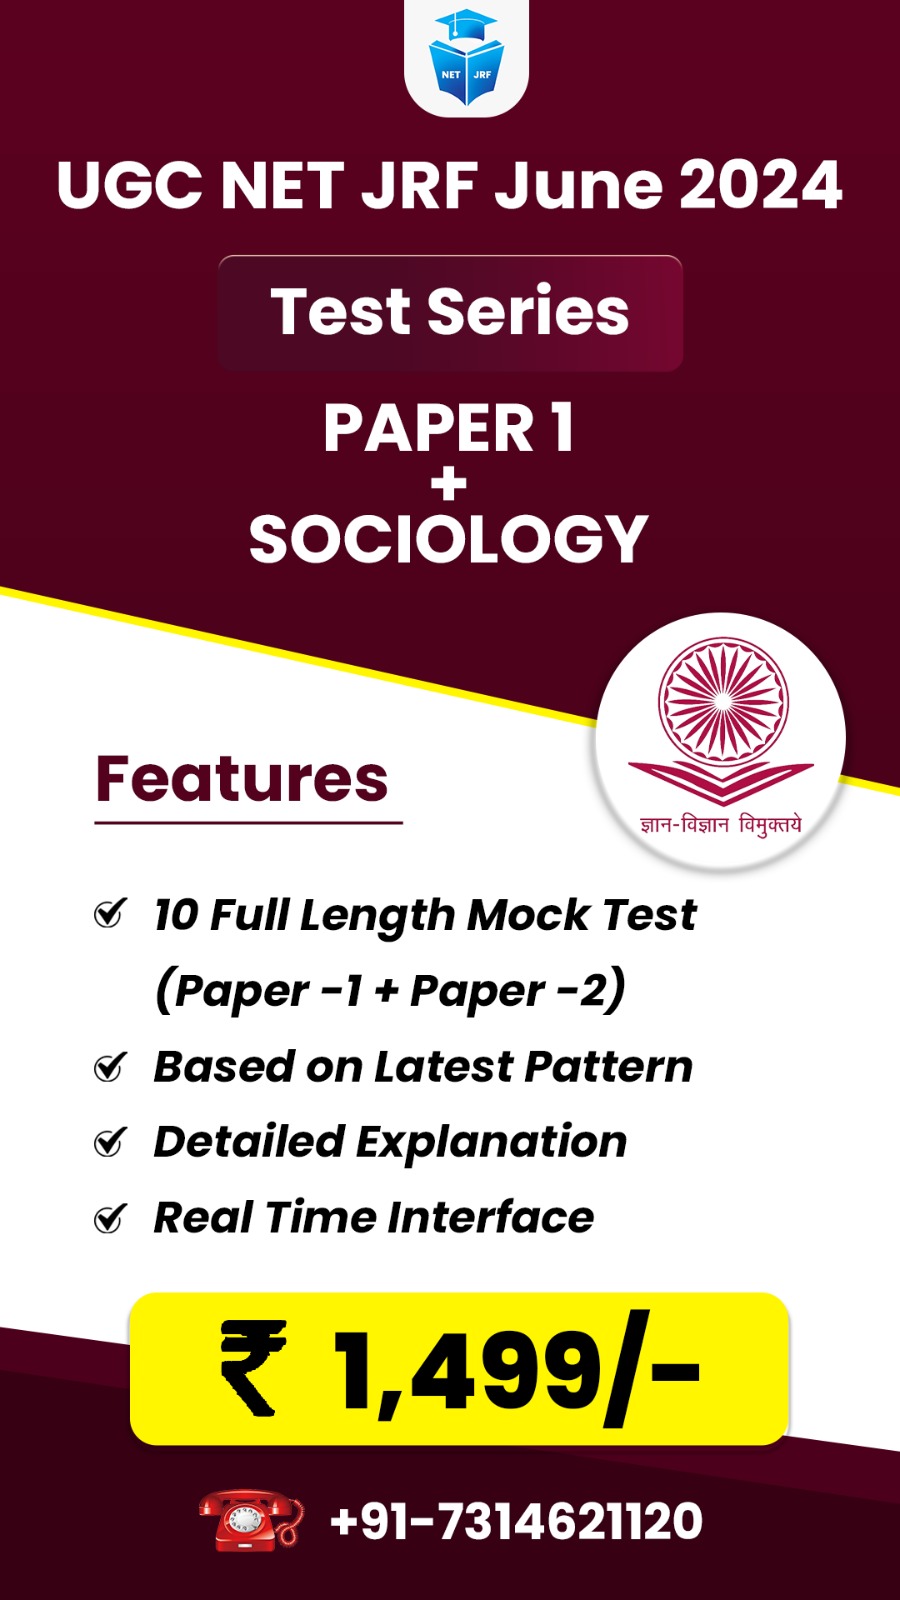 Sociology (Paper 1 + Paper 2) Test Series for June 2024